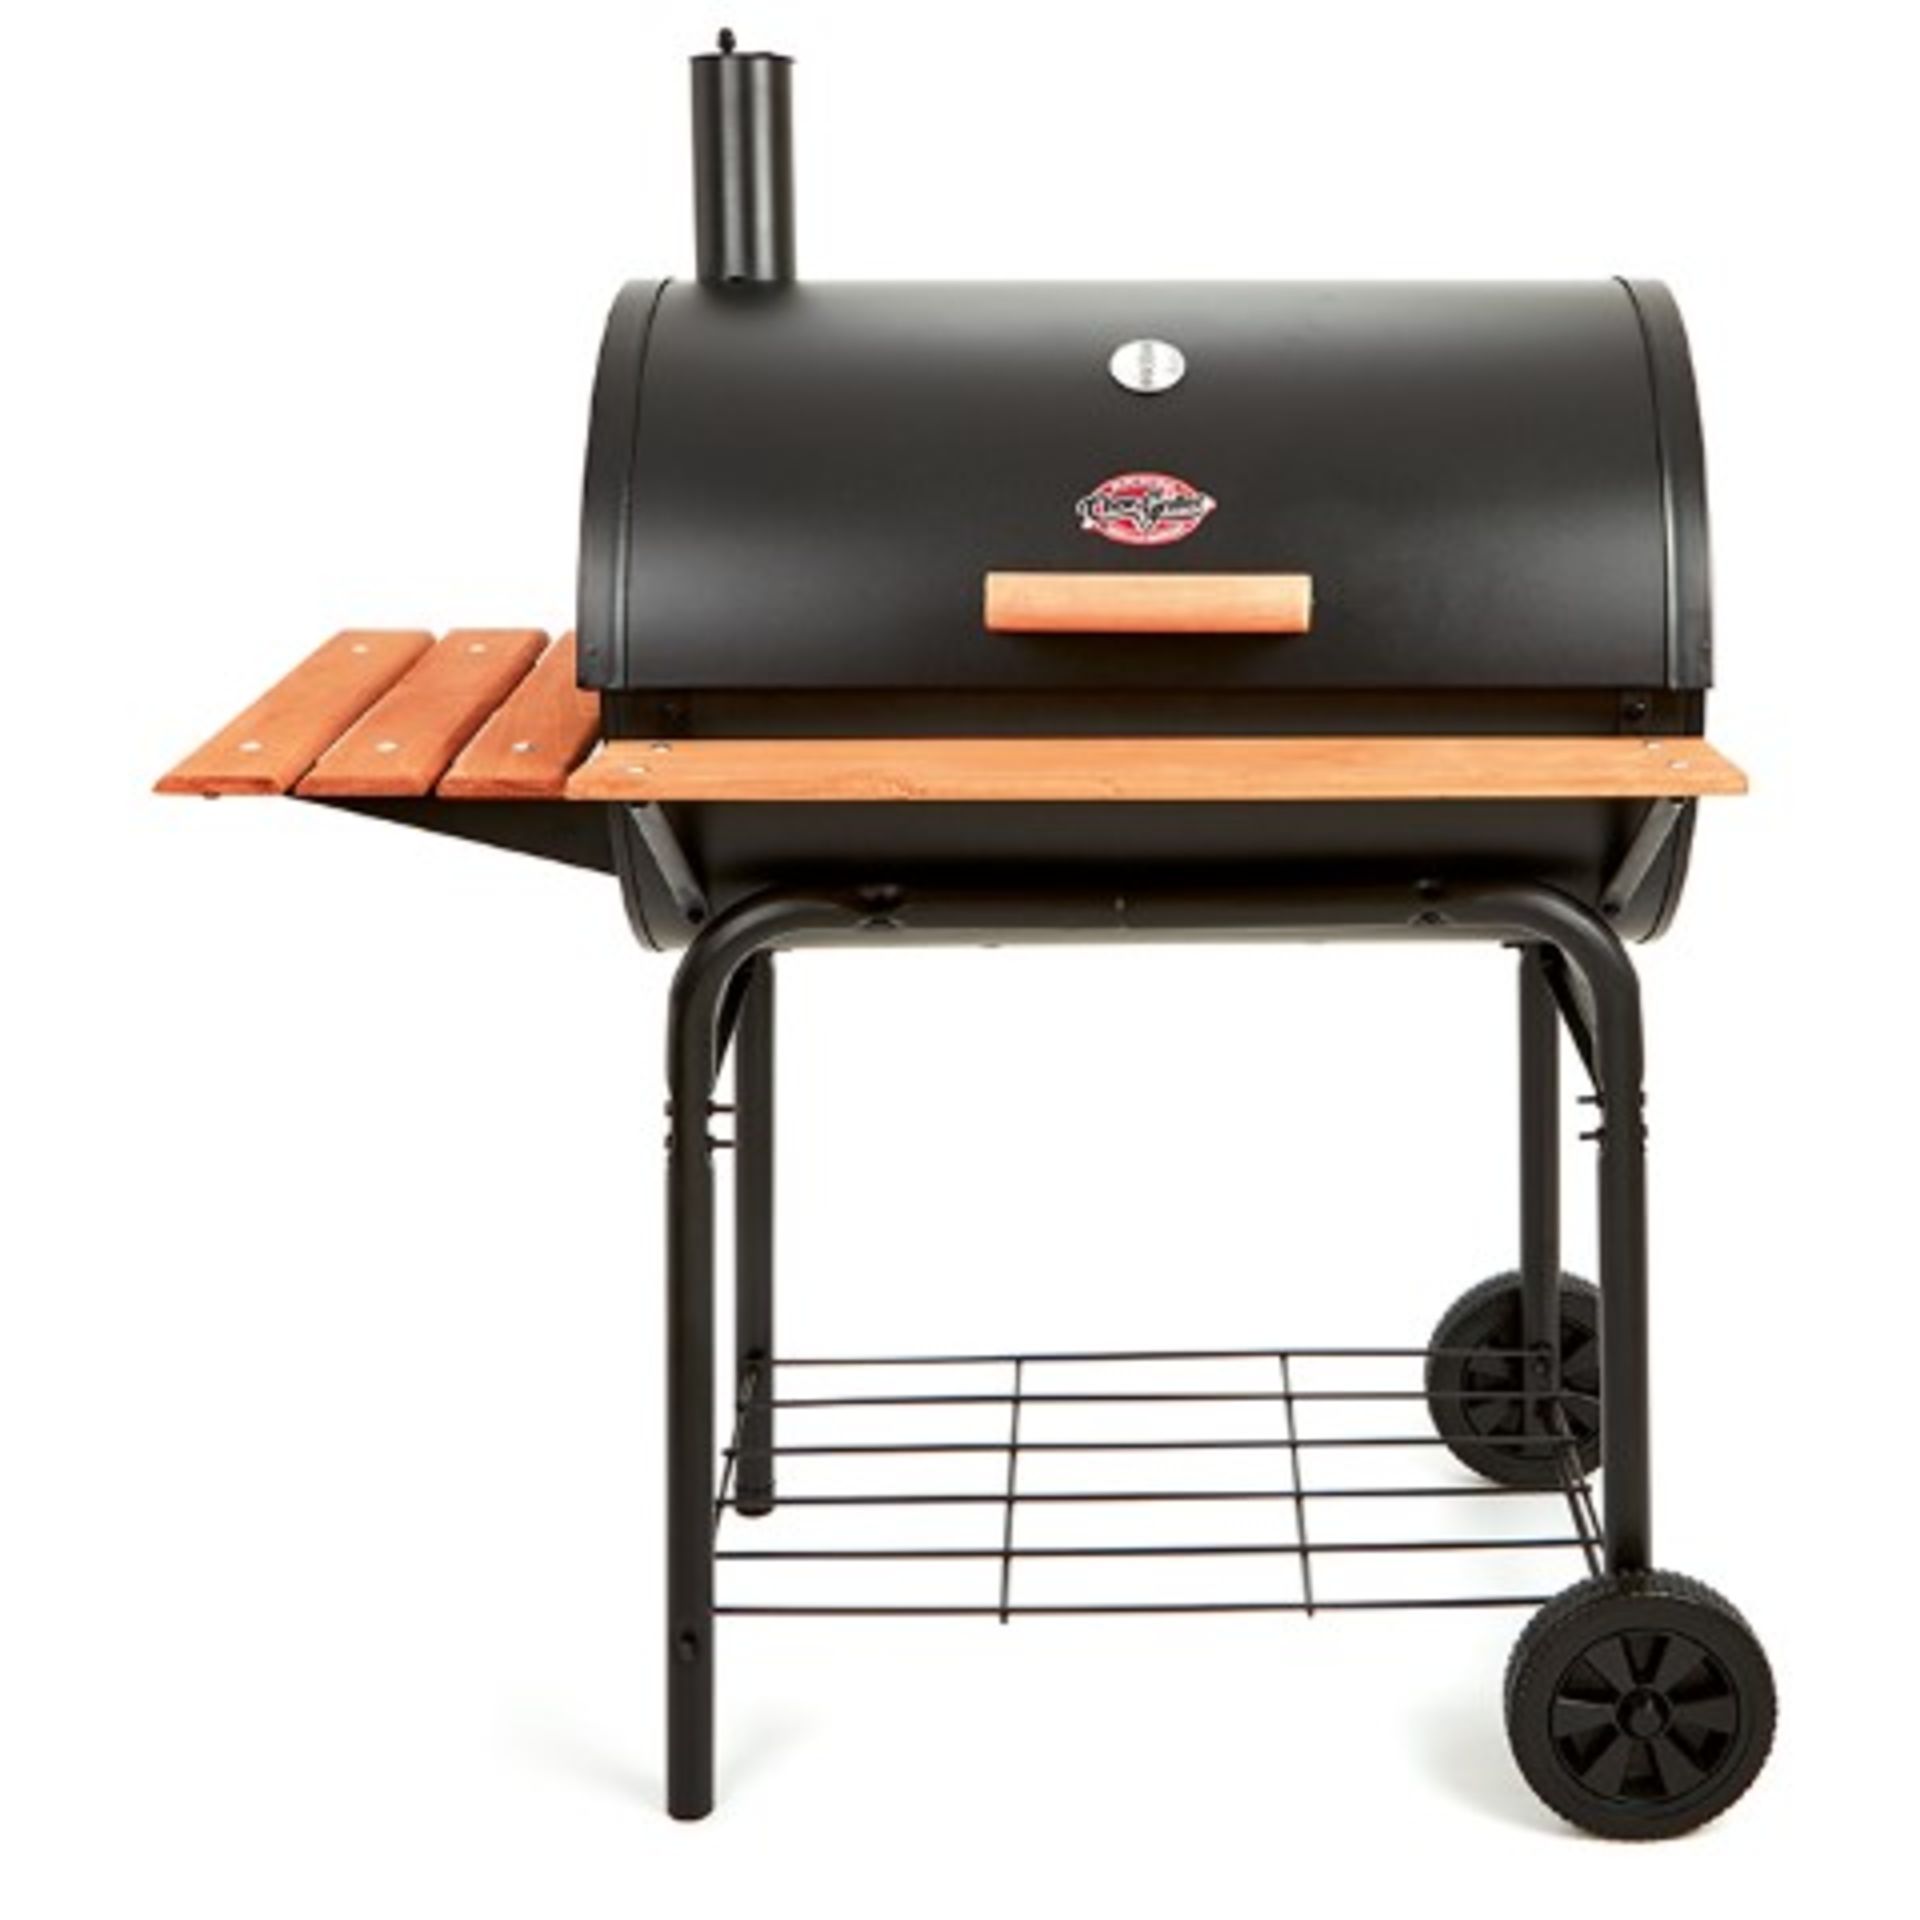 BRAND NEW* CHARCOAL GRILL PRO BLACK PATIO OUTDOOR GARDEN XL COOKING DELUXE AIR NEW CHAR BBQ - Image 2 of 8